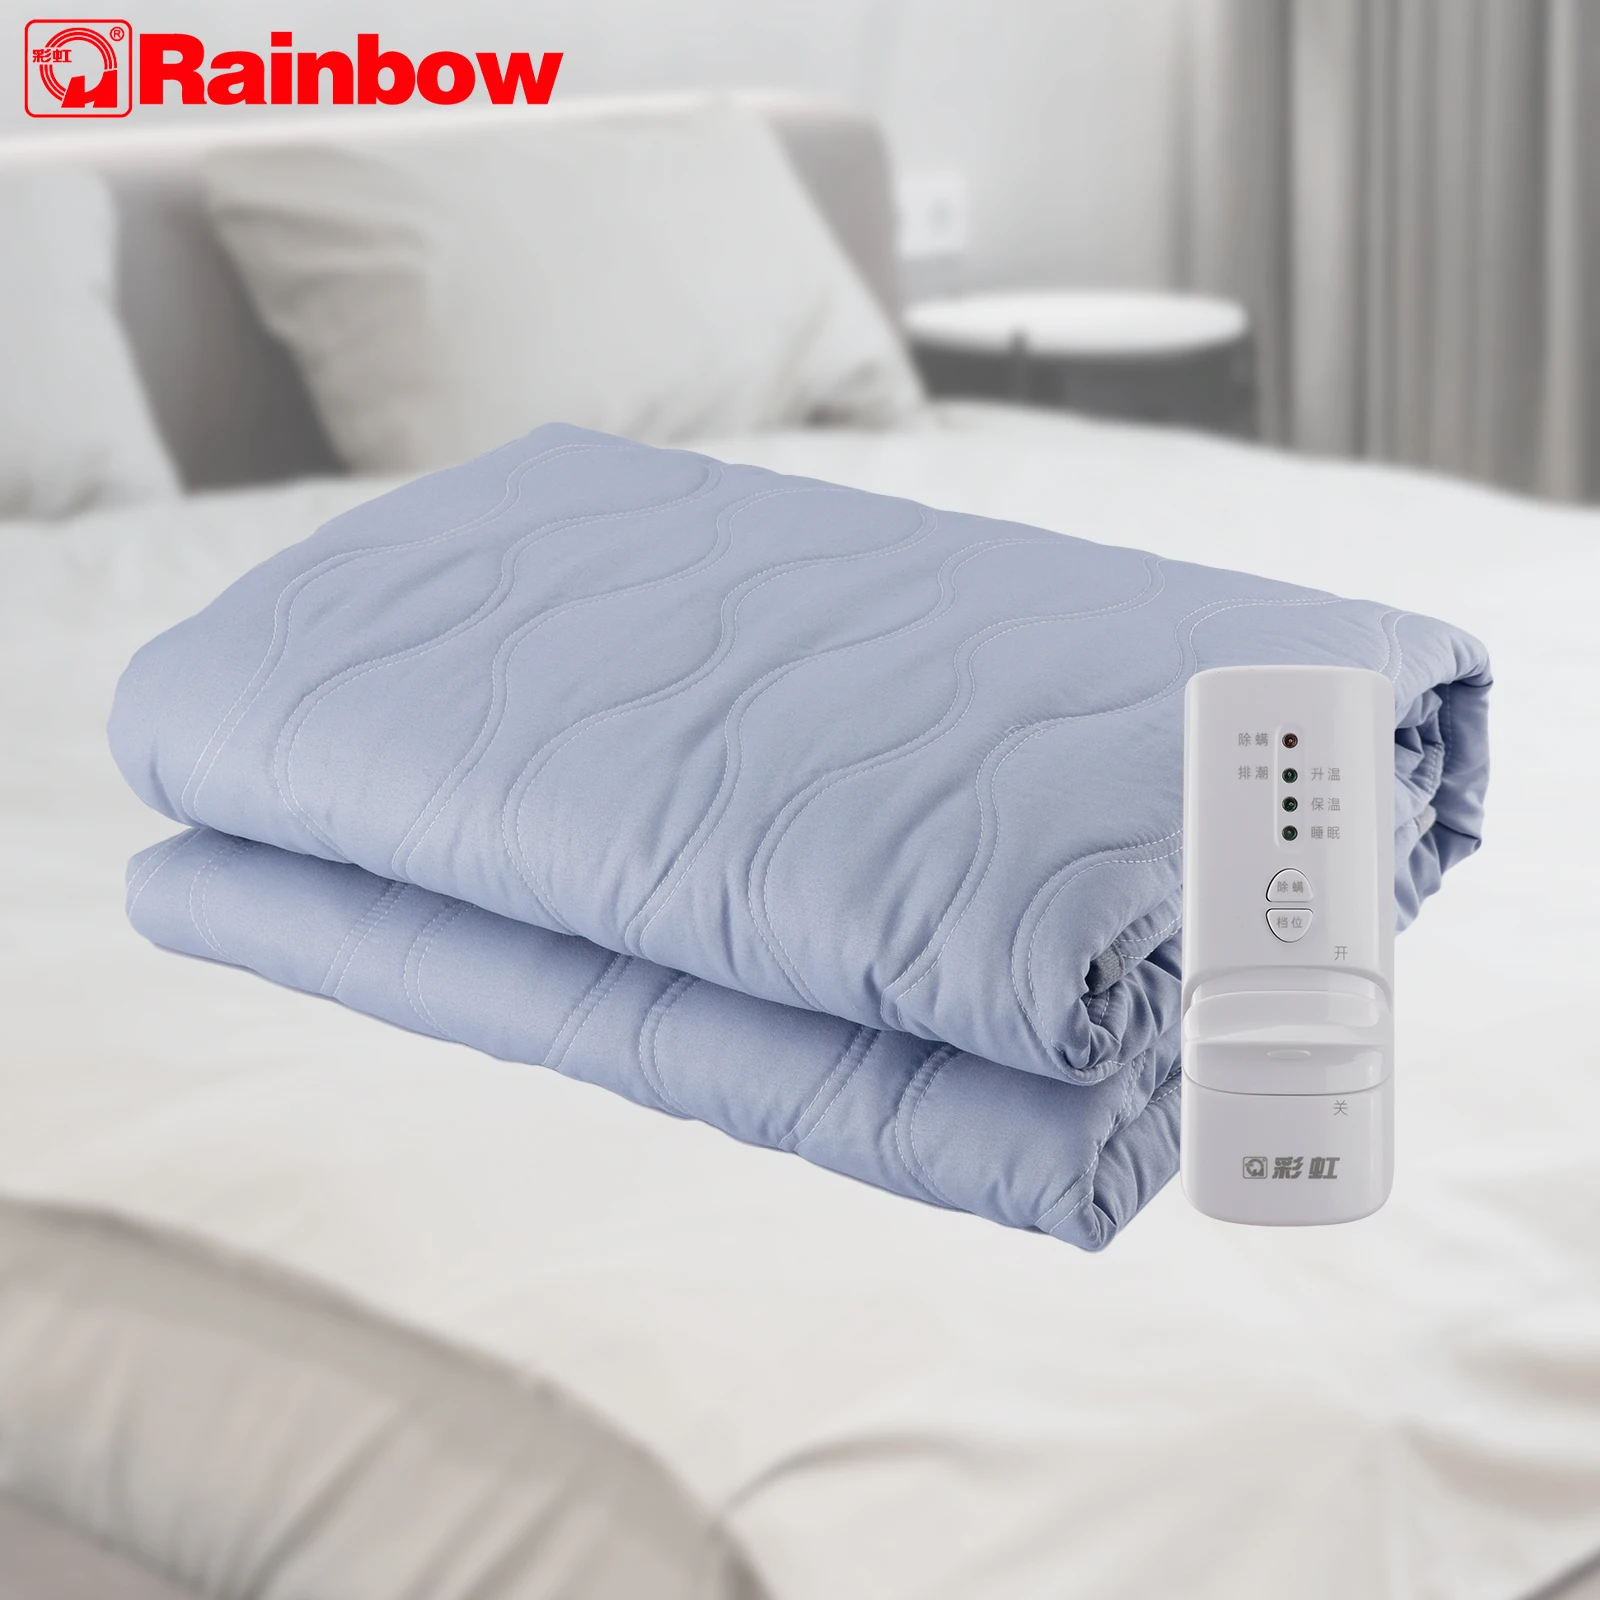 Rainbow Single Electric Blanket Warmer Brushed Fabric Heating Under Blanket Safe Protection Constant Temperature (W23E-18)